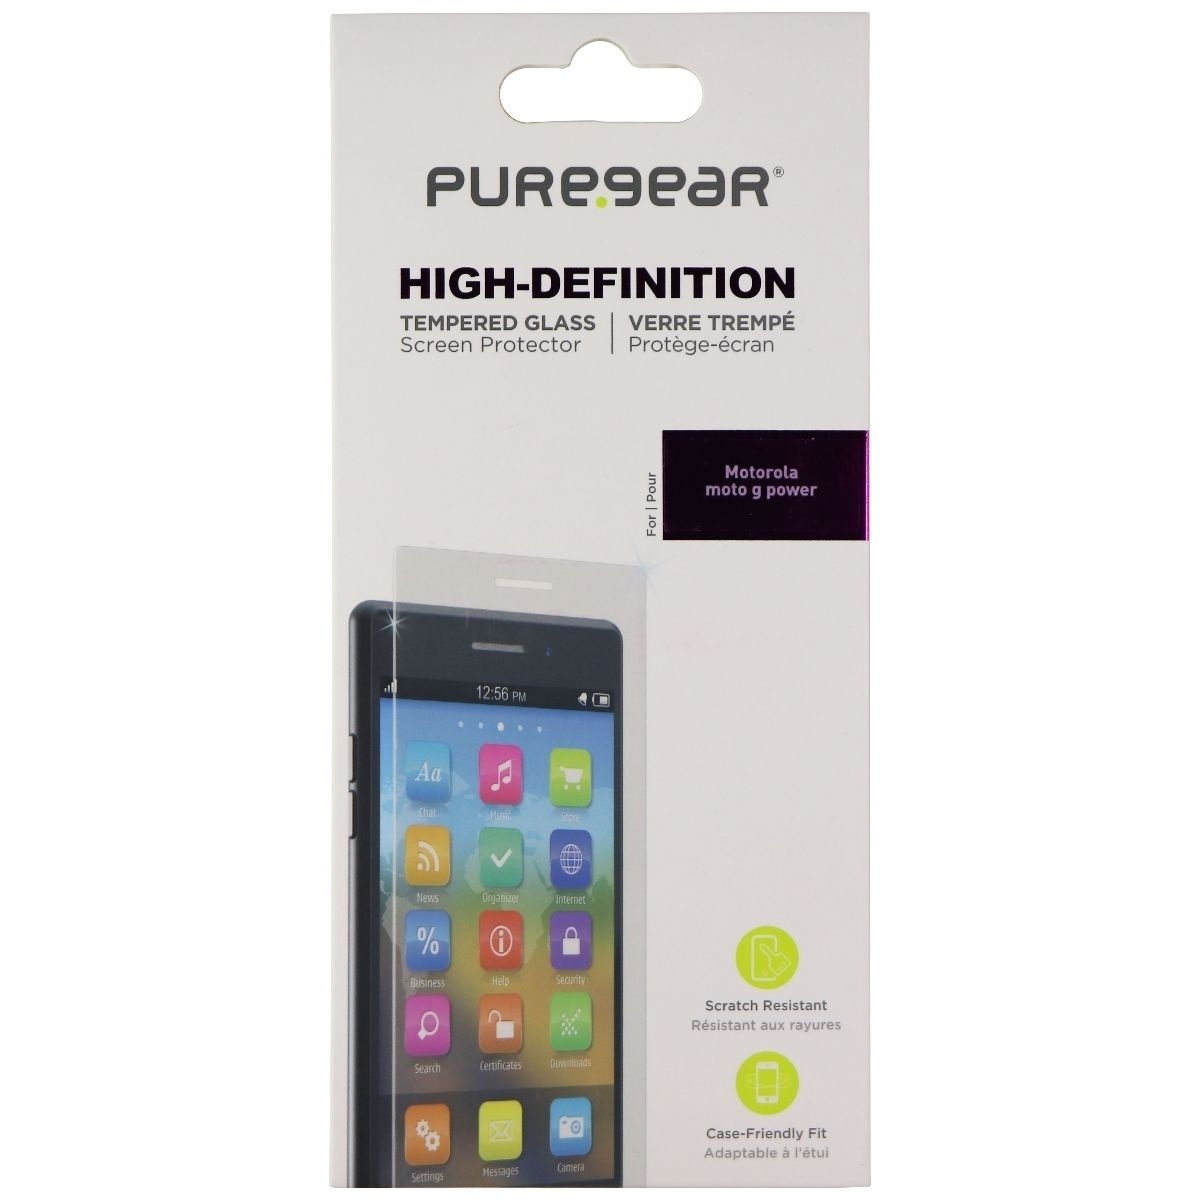 PureGear High-Definition Tempered Glass Screen Protector For Moto G Power